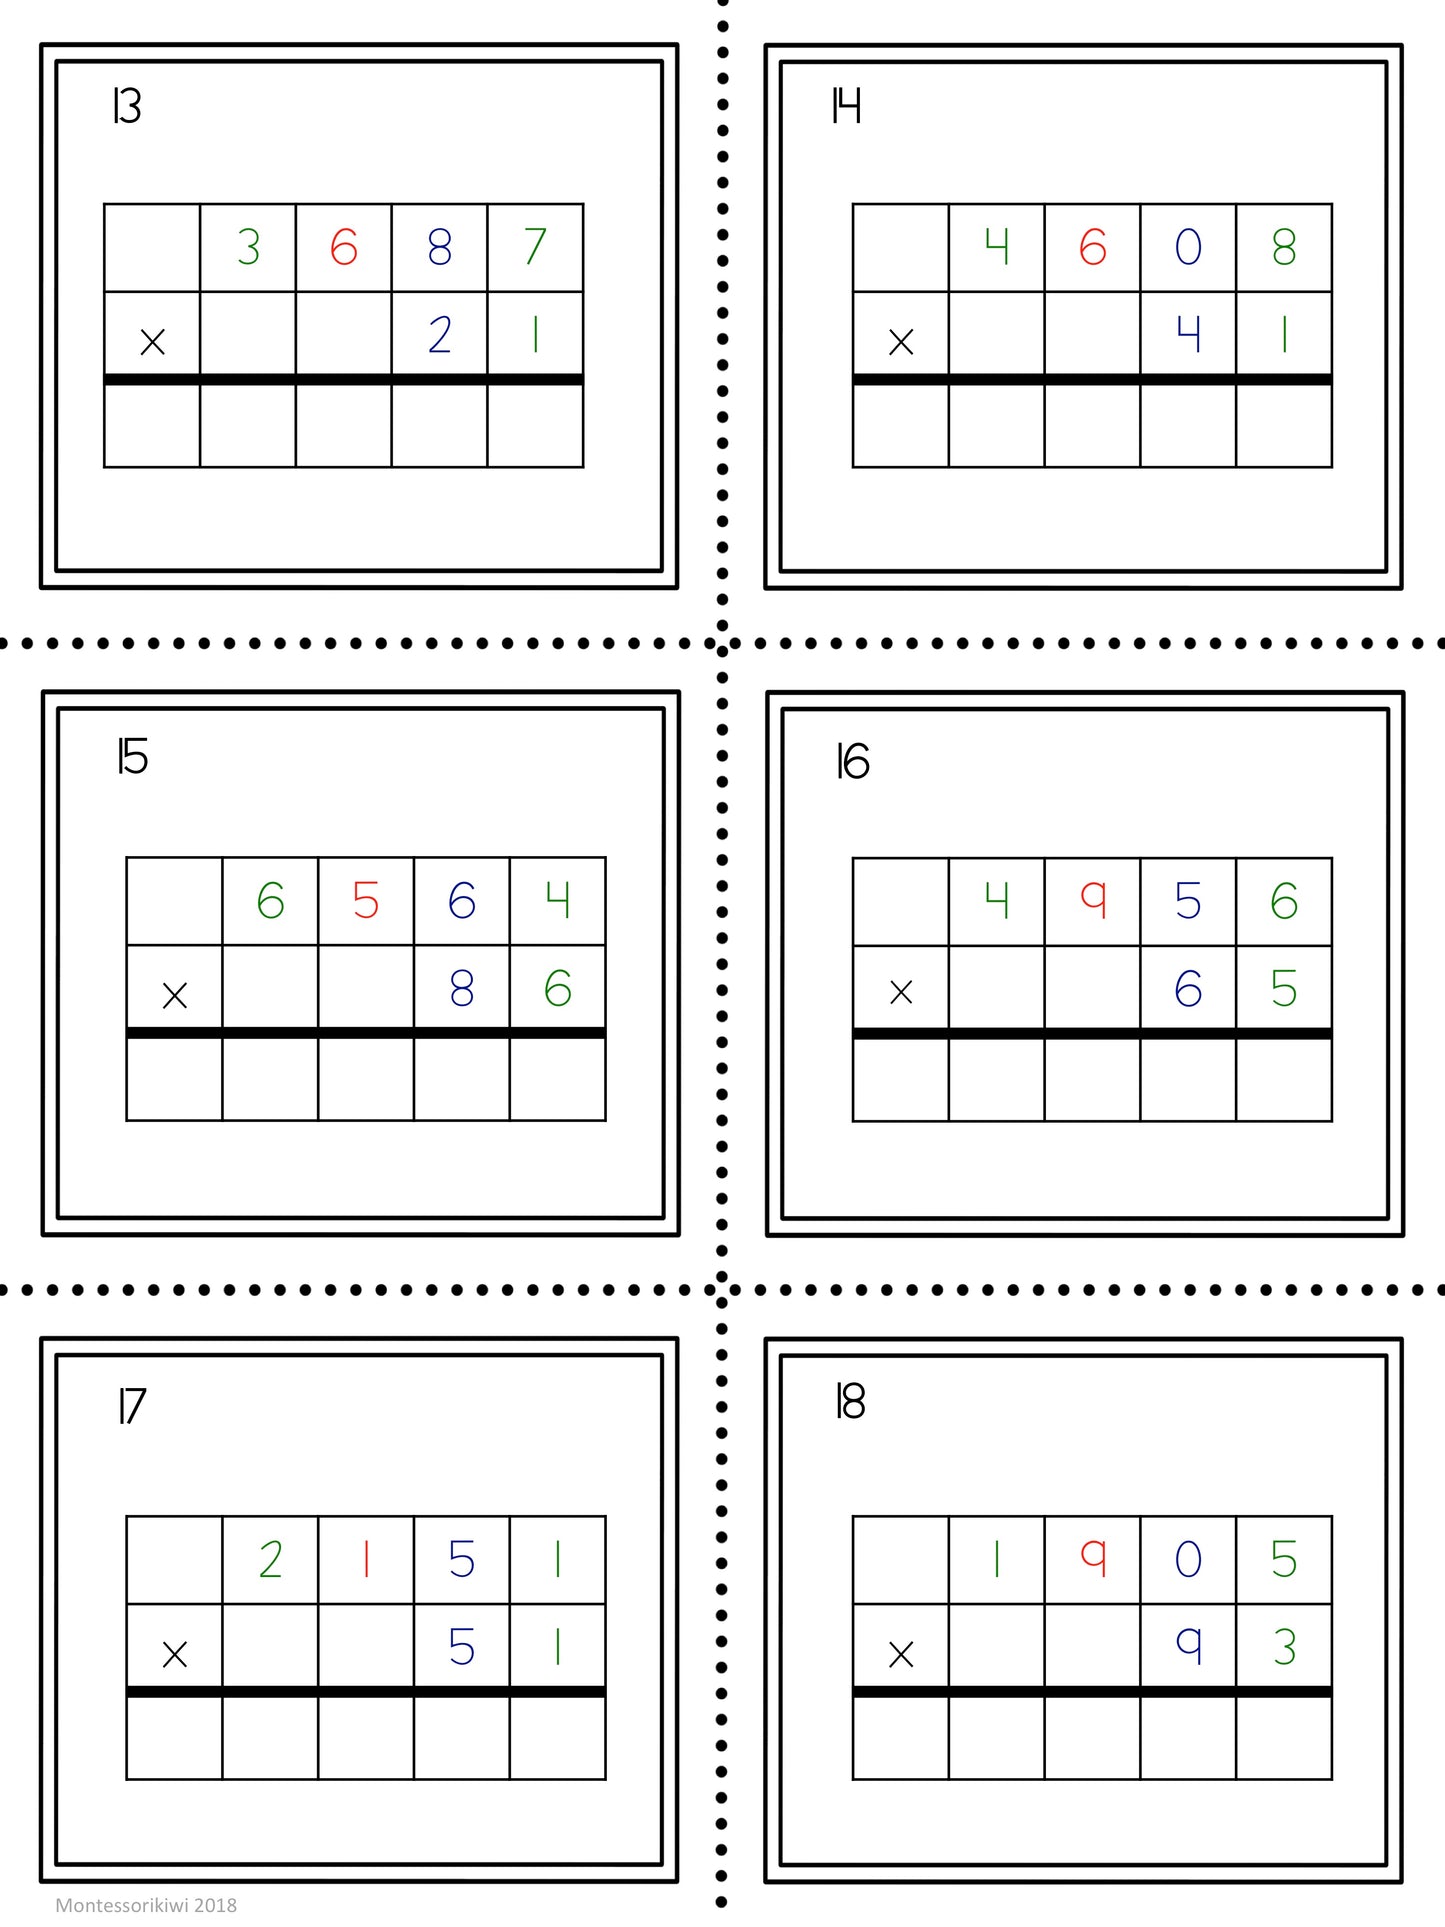 Multiplication questions: 2 and 3 digit multipliers - montessorikiwi